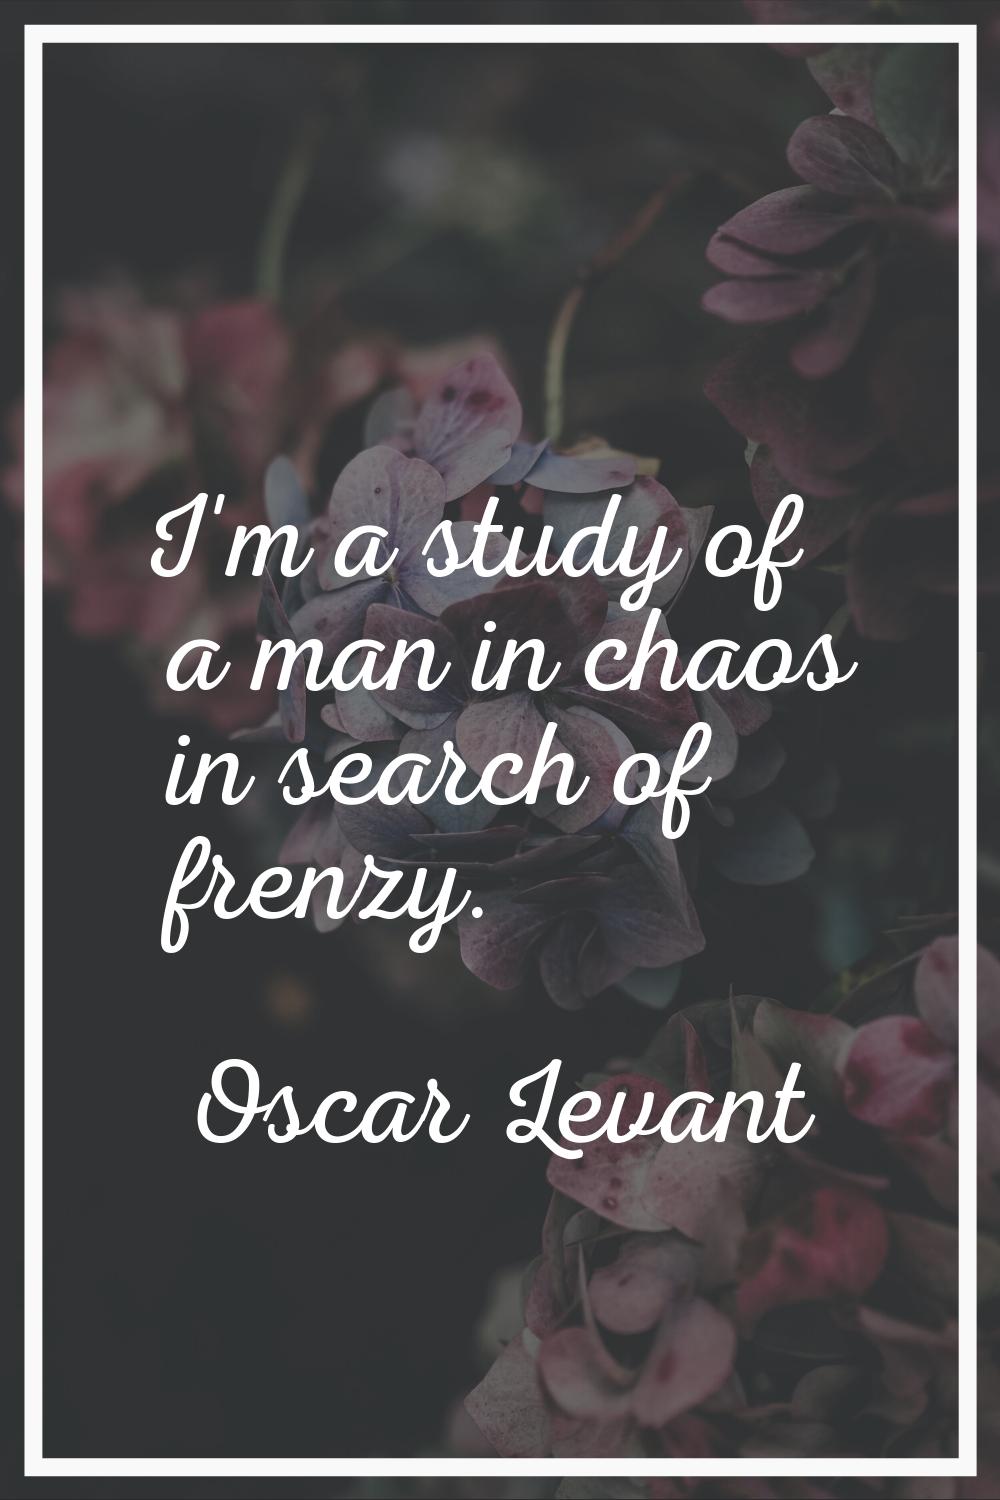 I'm a study of a man in chaos in search of frenzy.